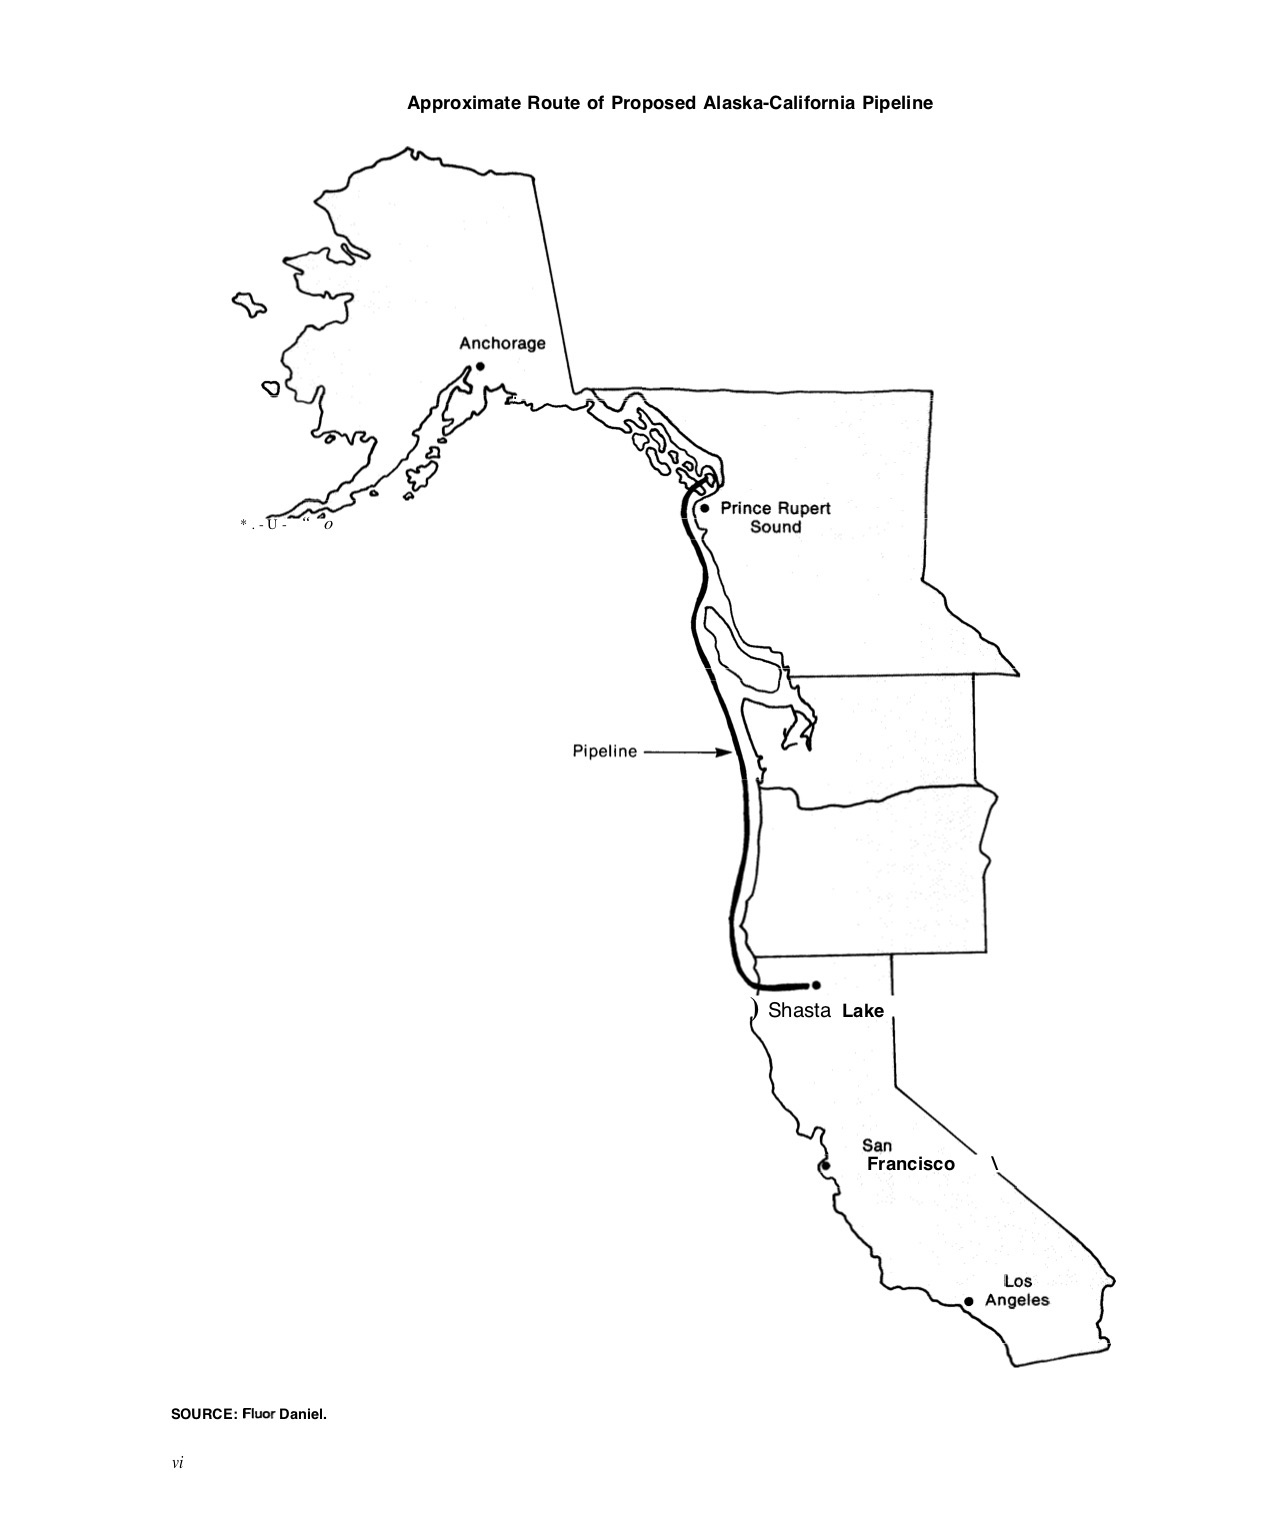 A simple black and white line map of North America's Pacific Ocean coast shows the route of a proposed water pipeline from Southeast Alaska to Shasta Lake in northern California.